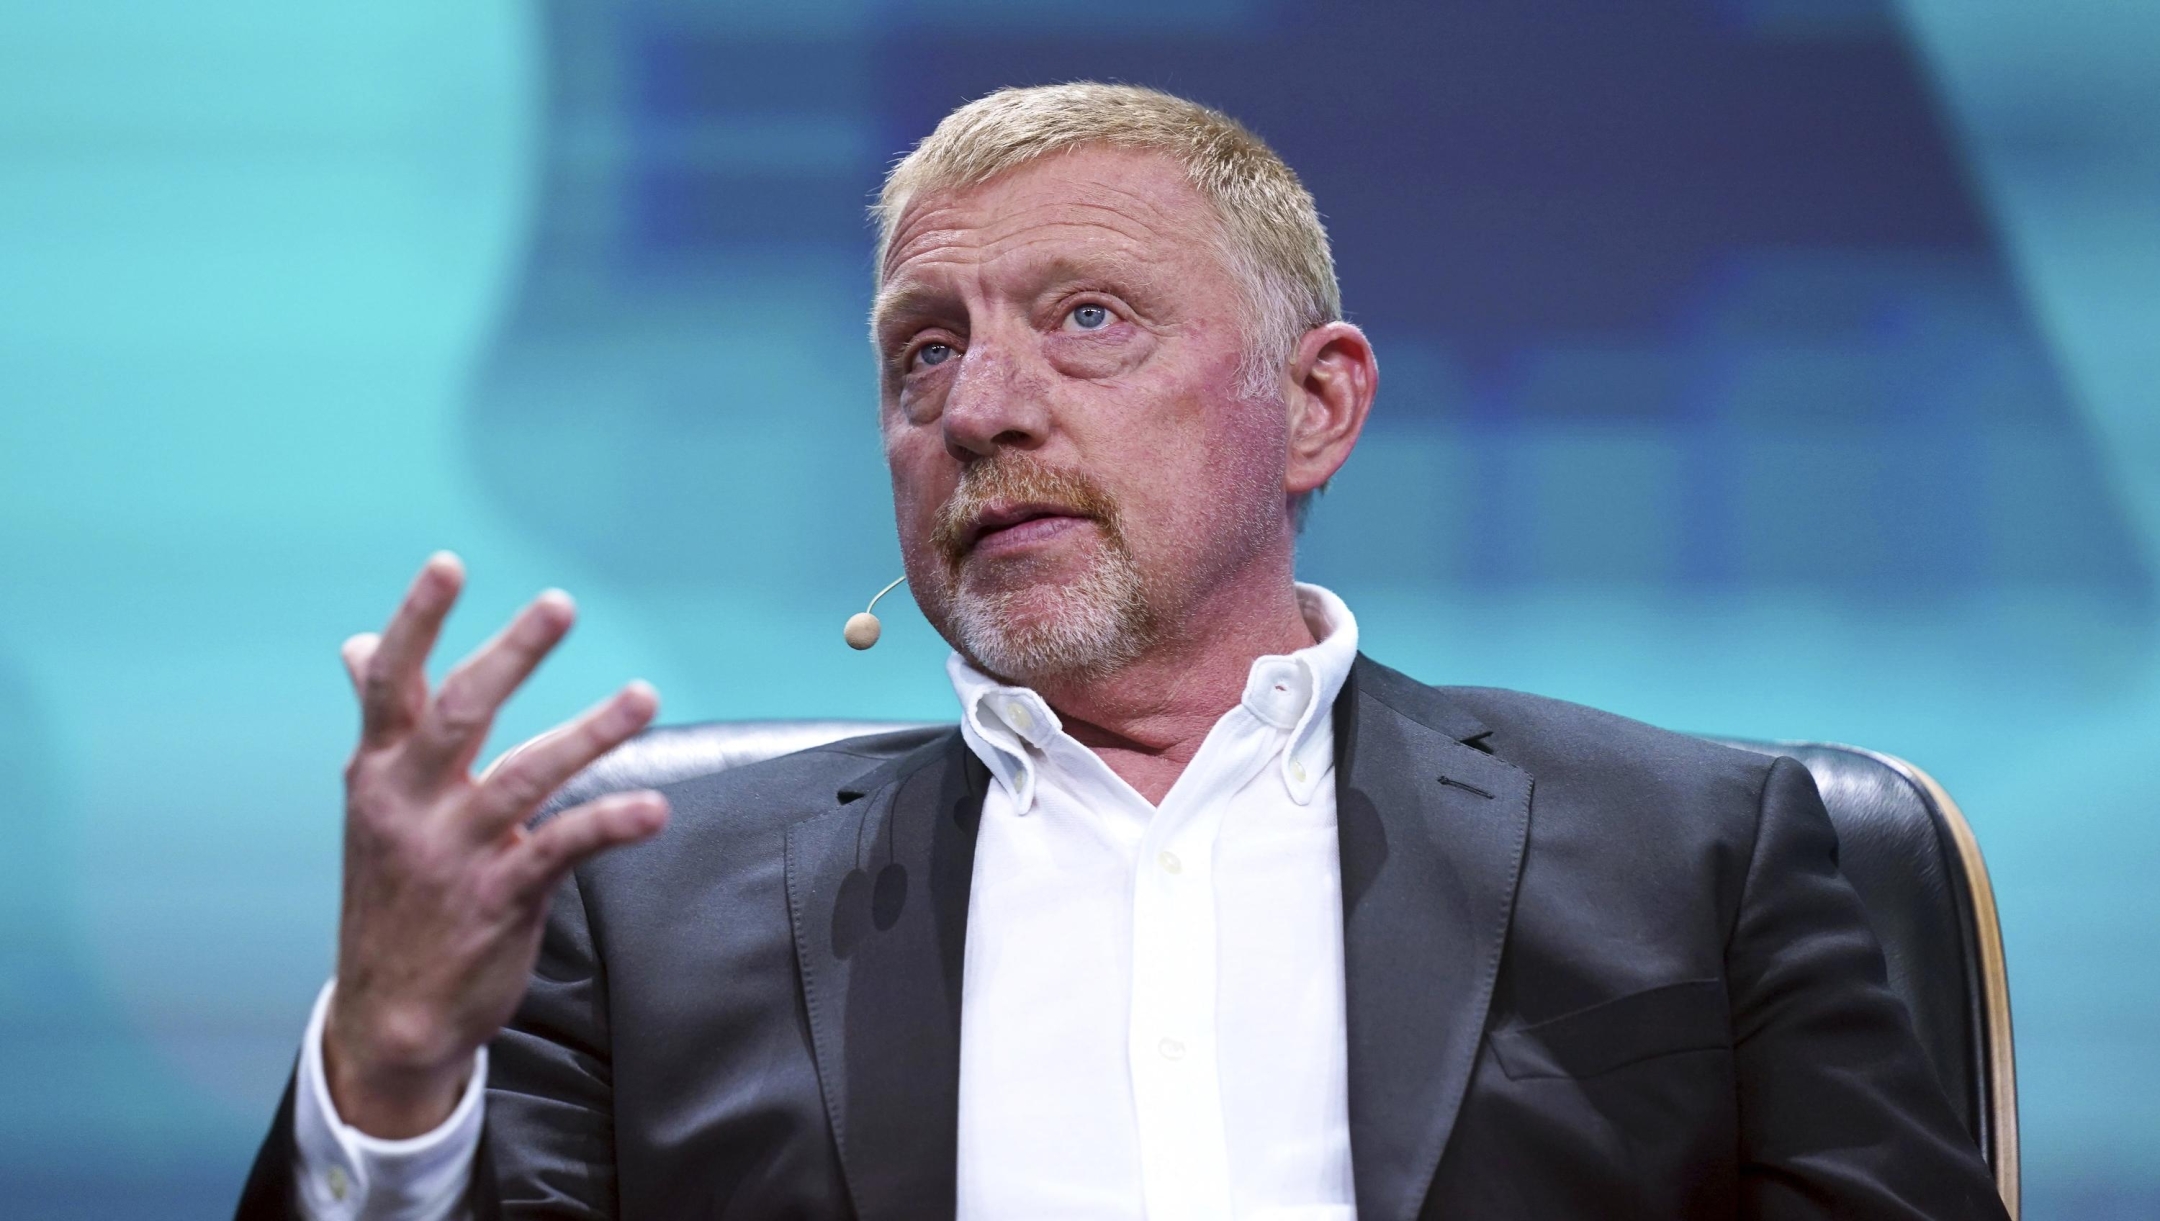 Former tennis player Boris Becker sits on stage at the OMR digital trade show in the exhibition halls, in Hamburg, Germany, Wednesday, May 10, 2023. Around 70,000 visitors are expected at this year's OMR Festival in Hamburg. It is one of the largest marketing and digital conferences in Europe. (Marcus Brandt/dpa via AP)